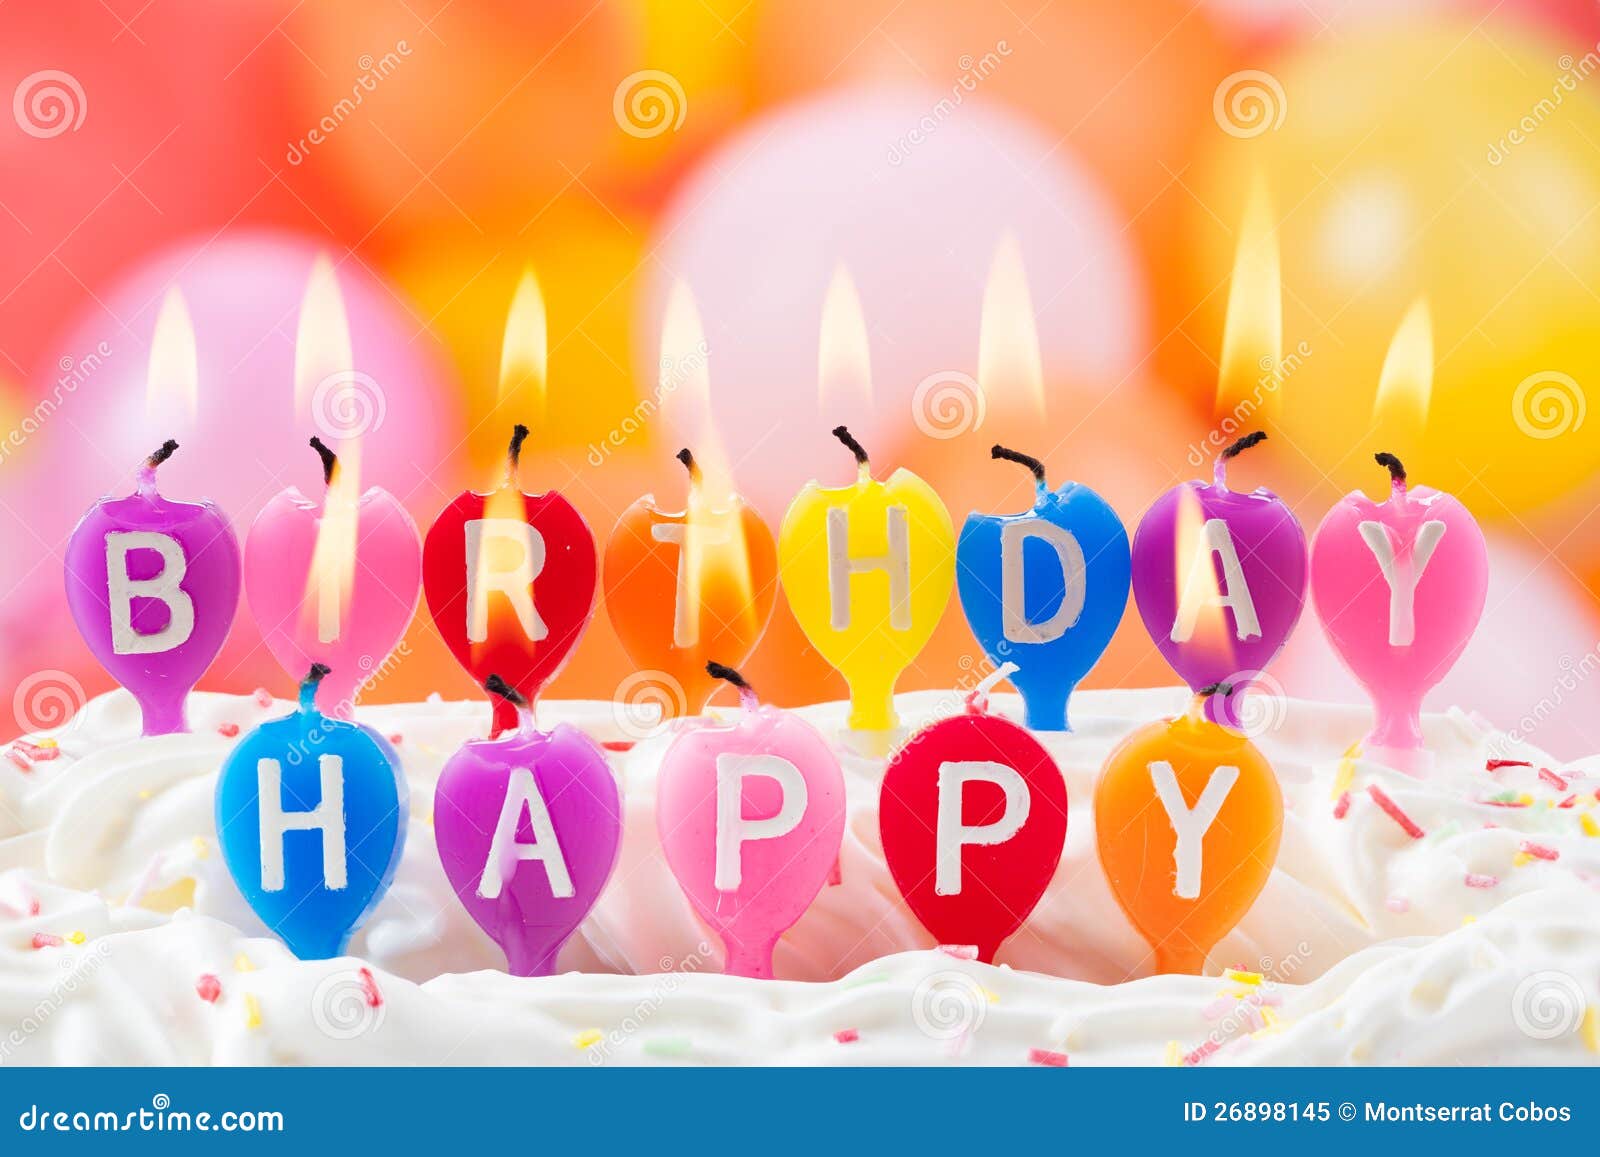 Happy Birthday Written in Lit Candles Stock Image - Image of flame, party:  26898145